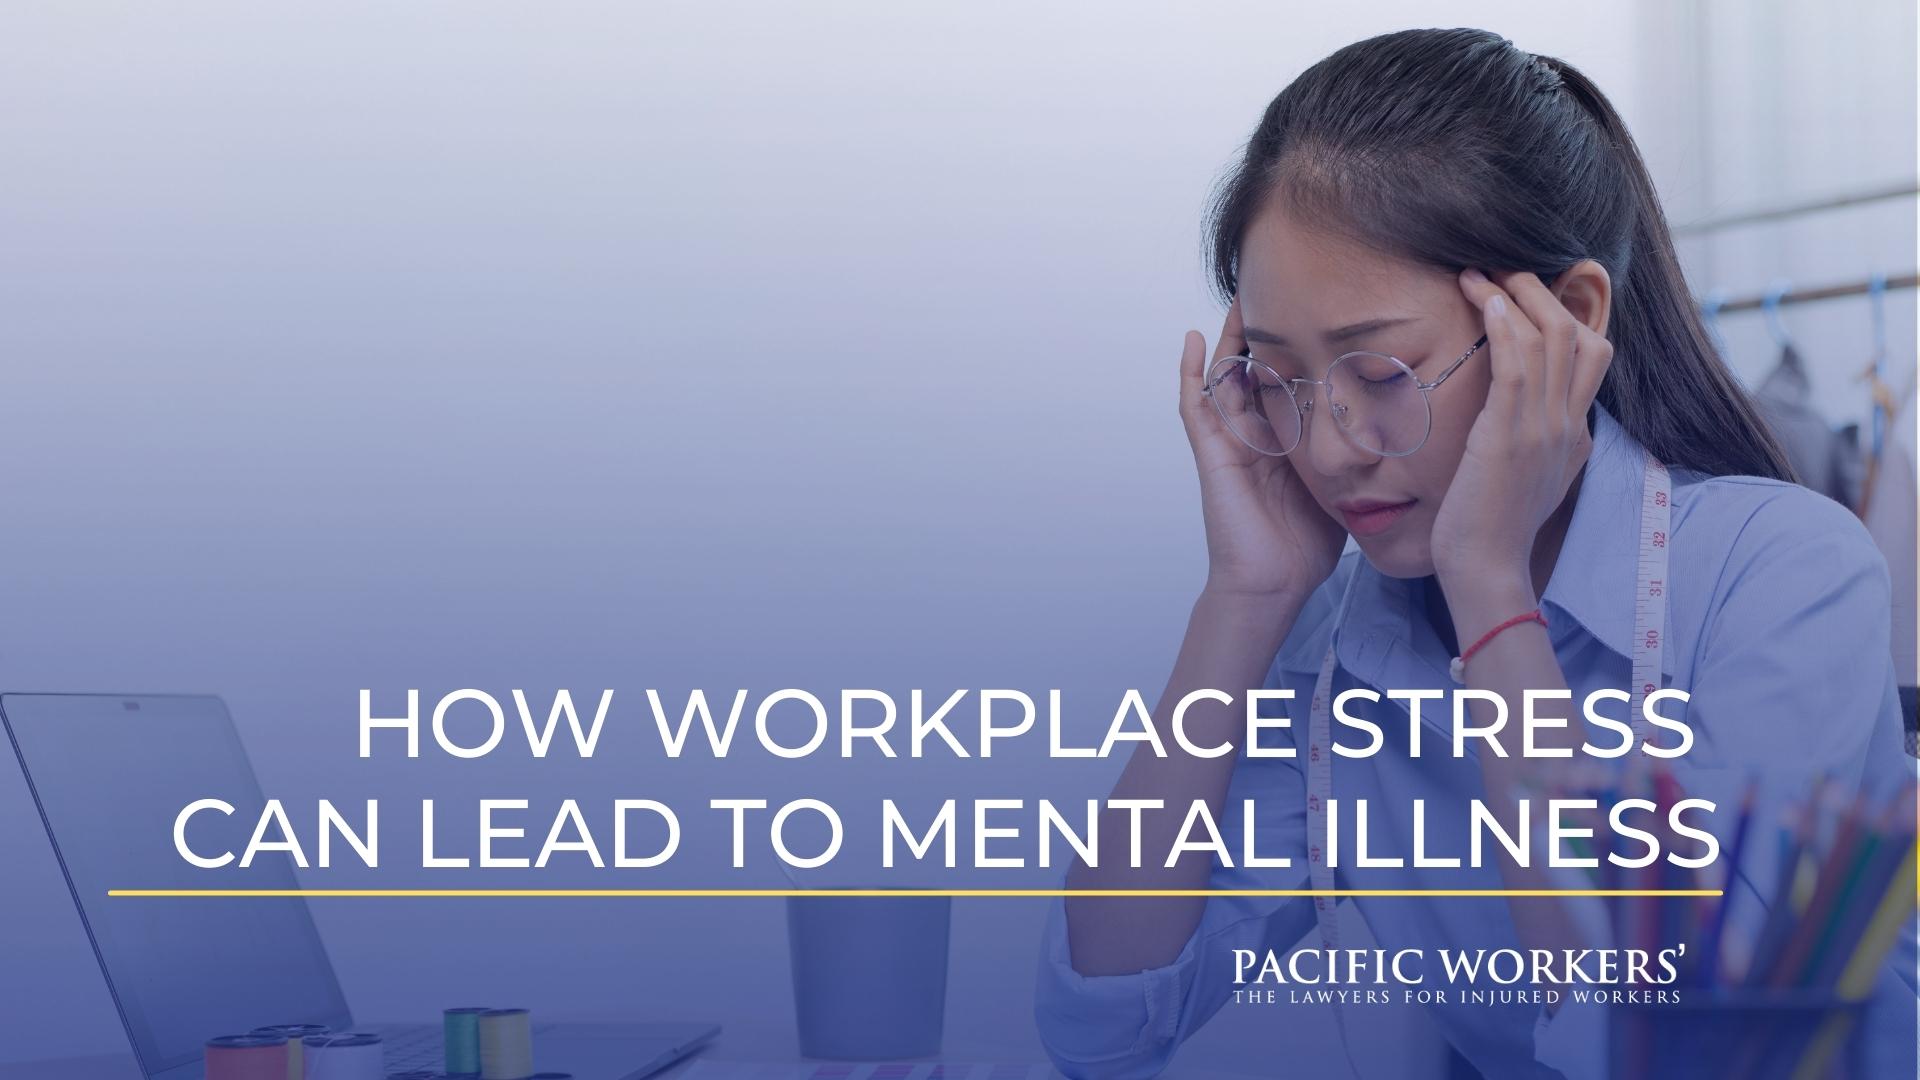 How Workplace Stress Can Lead to Mental Illness